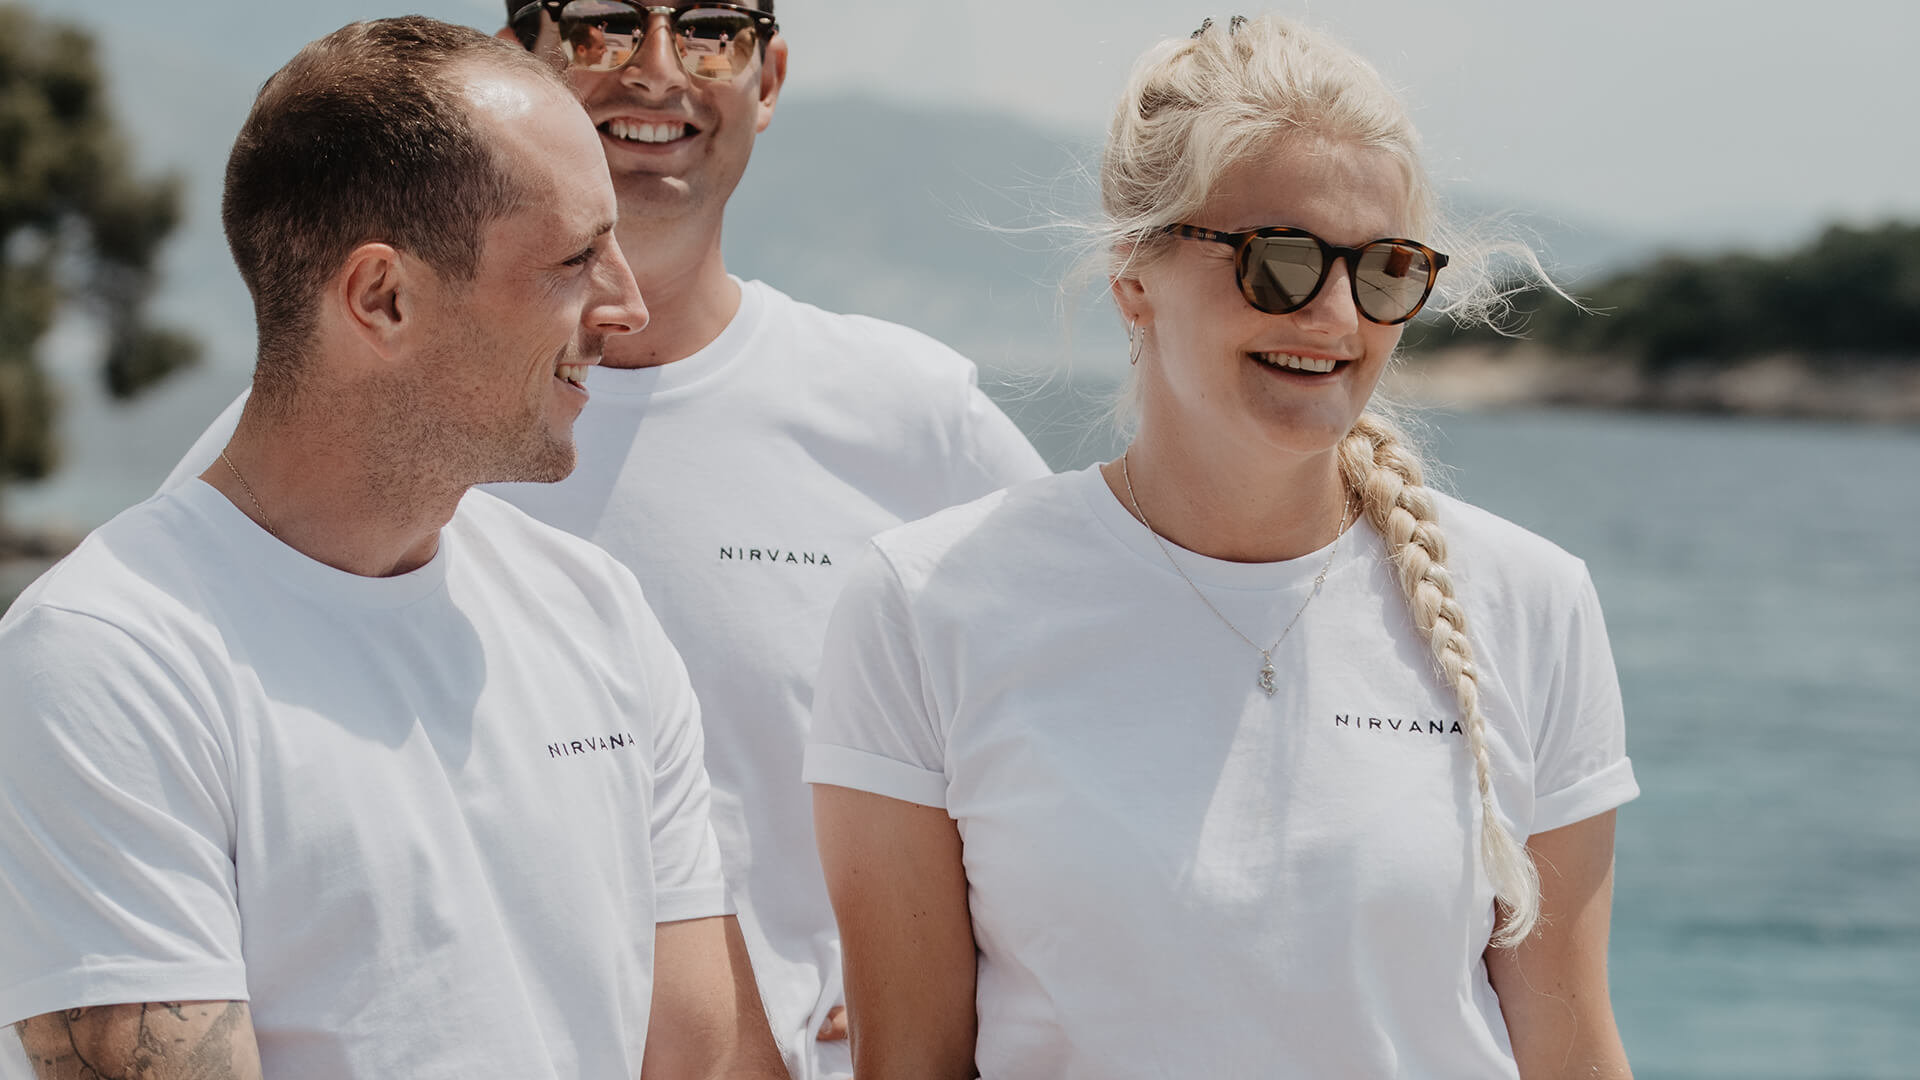 Get on board with luxury sustainable yacht crew uniforms this season